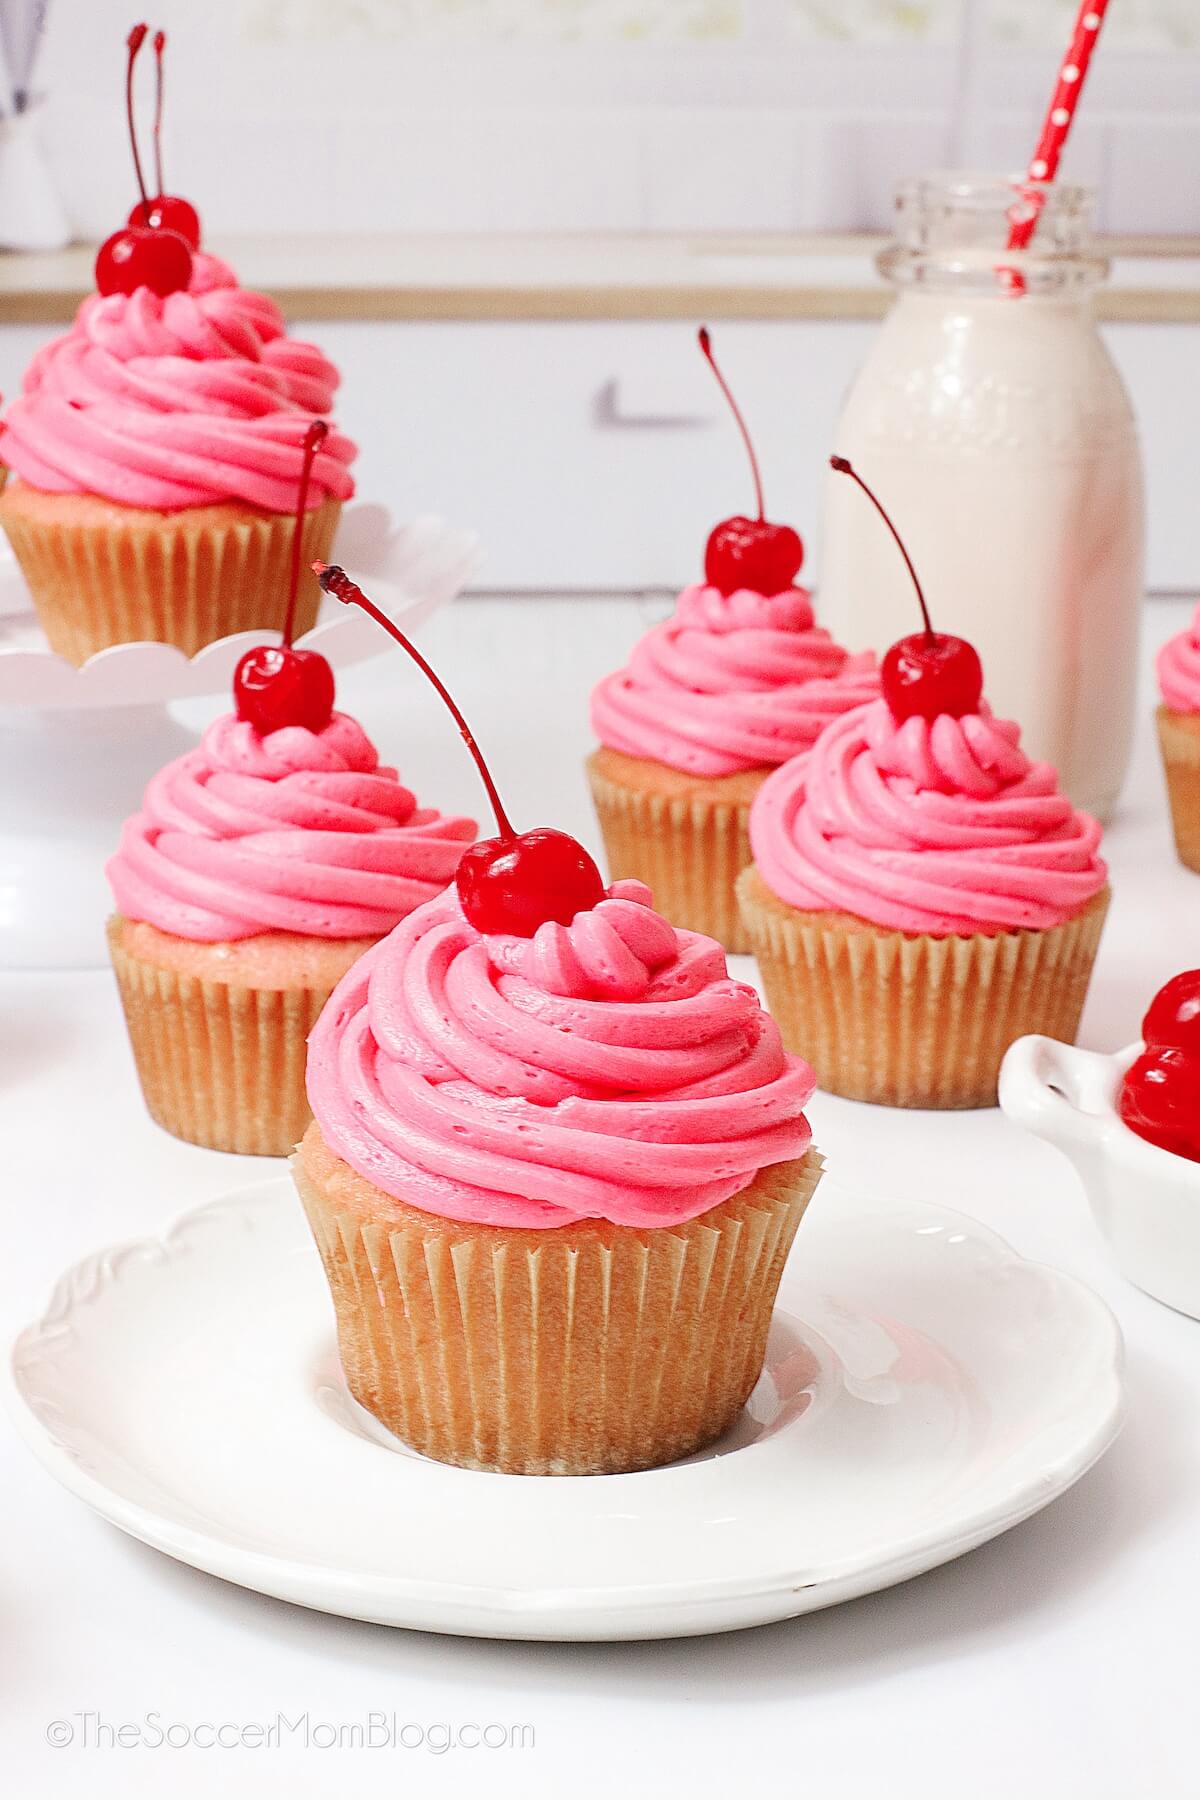 Cherry Cupcakes on plate, jar of milk in background.